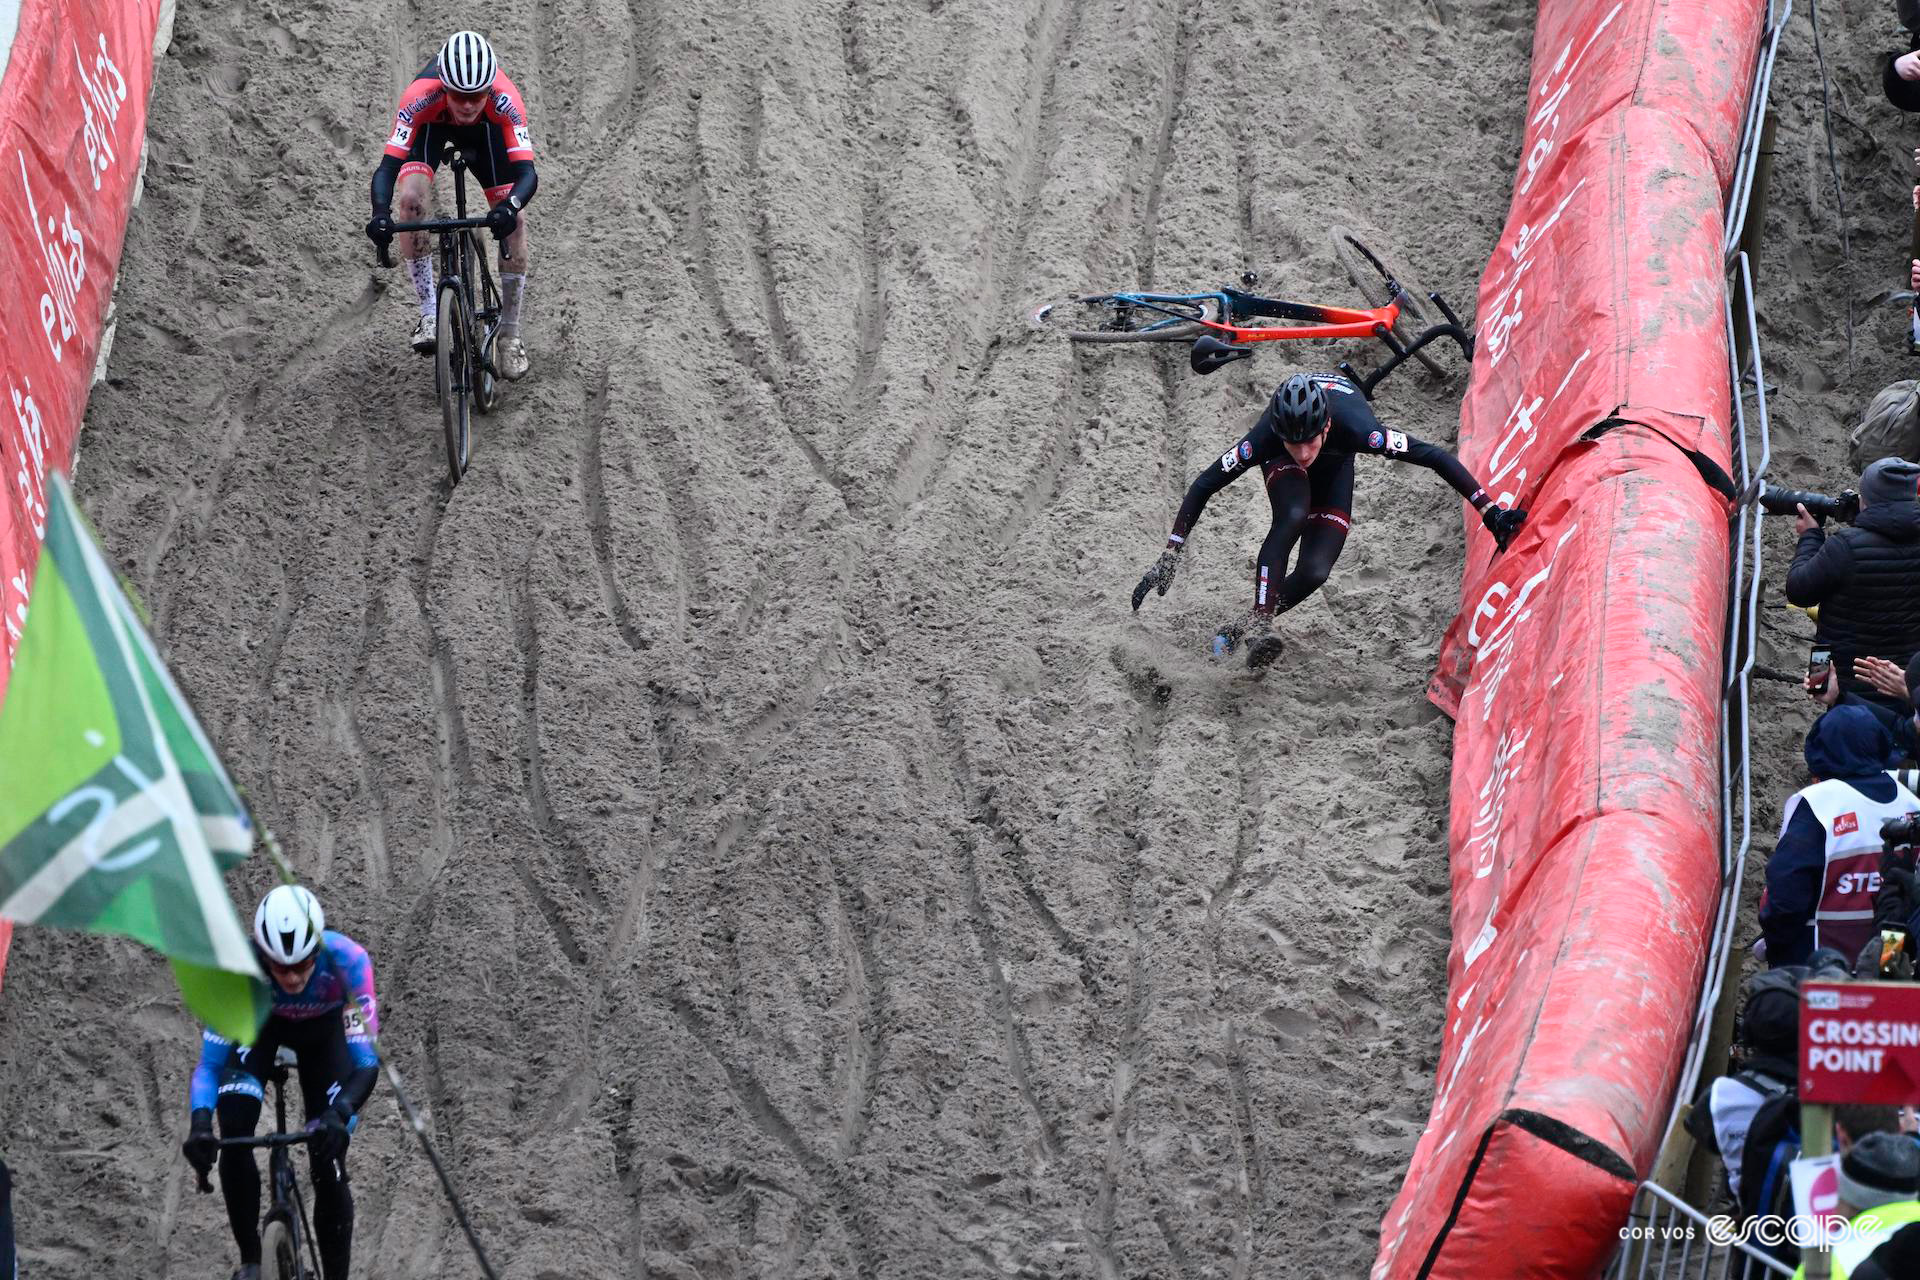 A rider takes a tumble on the fast sandy descent into the pit during UCI World Cup Zonhoven.